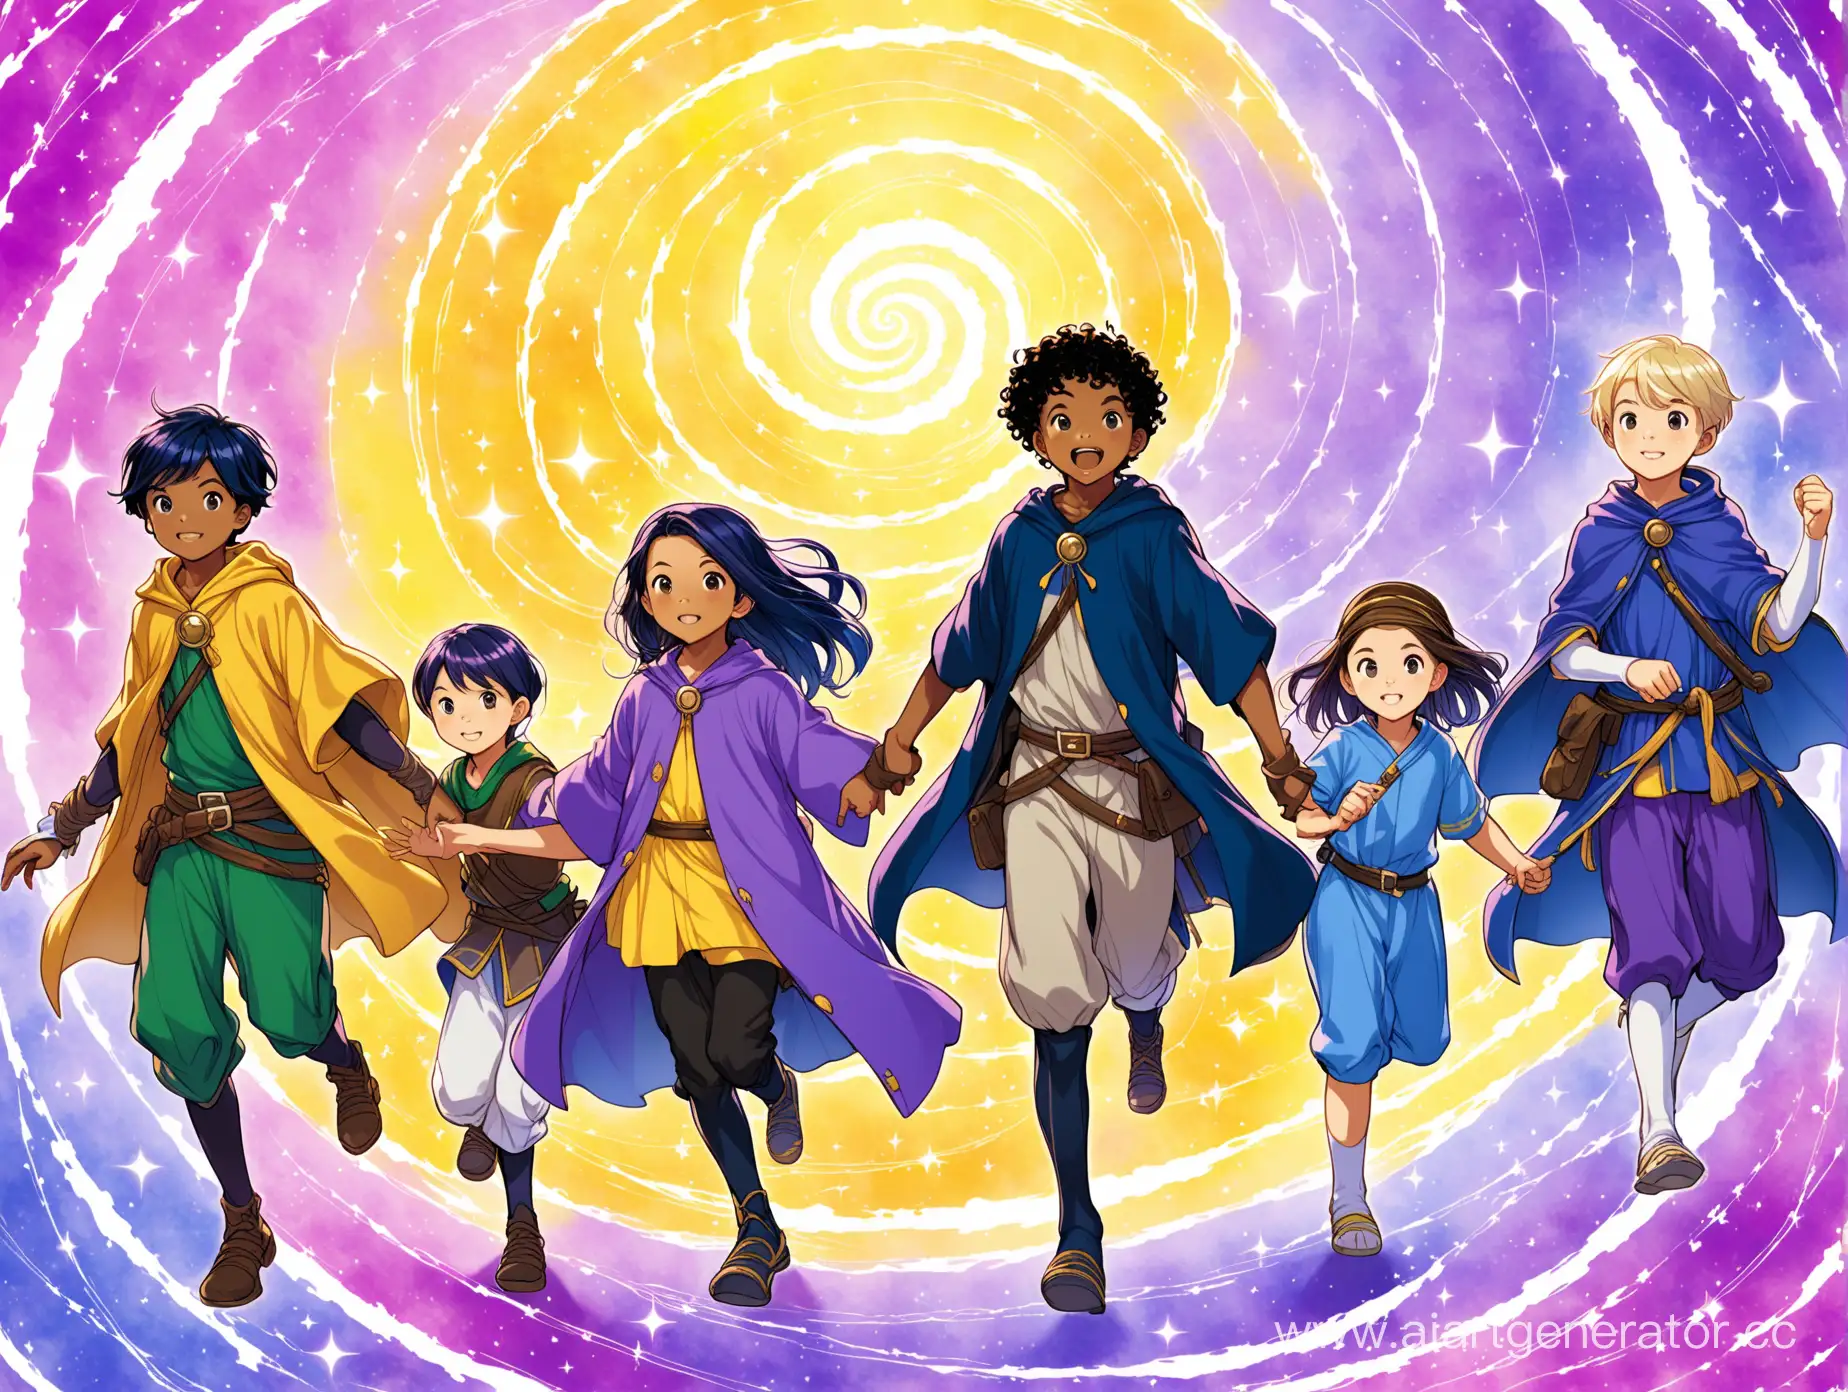 Five 12 year old children are on a quest. There is a wizard and a rogue and a warrior, a mix of boys and girls. There is an asian kid, black kid, and white kid. There are colors of periwinkle, purple, navy, and yellow. There are some swirls and it evokes feeling of inspiration and imagination.